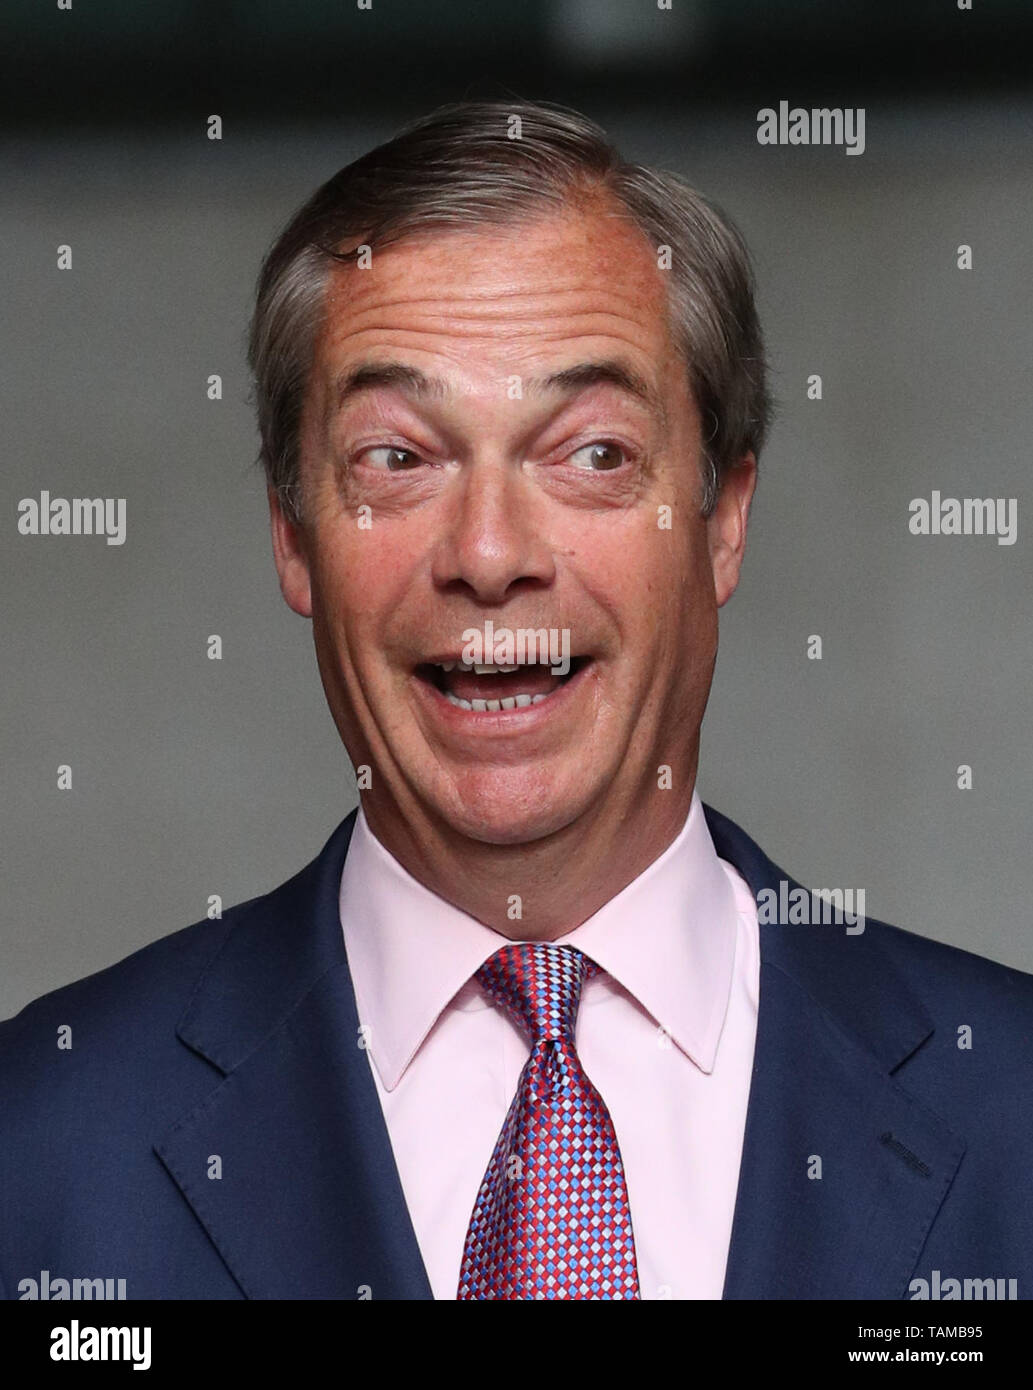 Brexit Party leader Nigel Farage leaving New Broadcasting House in London after giving an interview on the Today programme following the European Parliamentary election results. Stock Photo